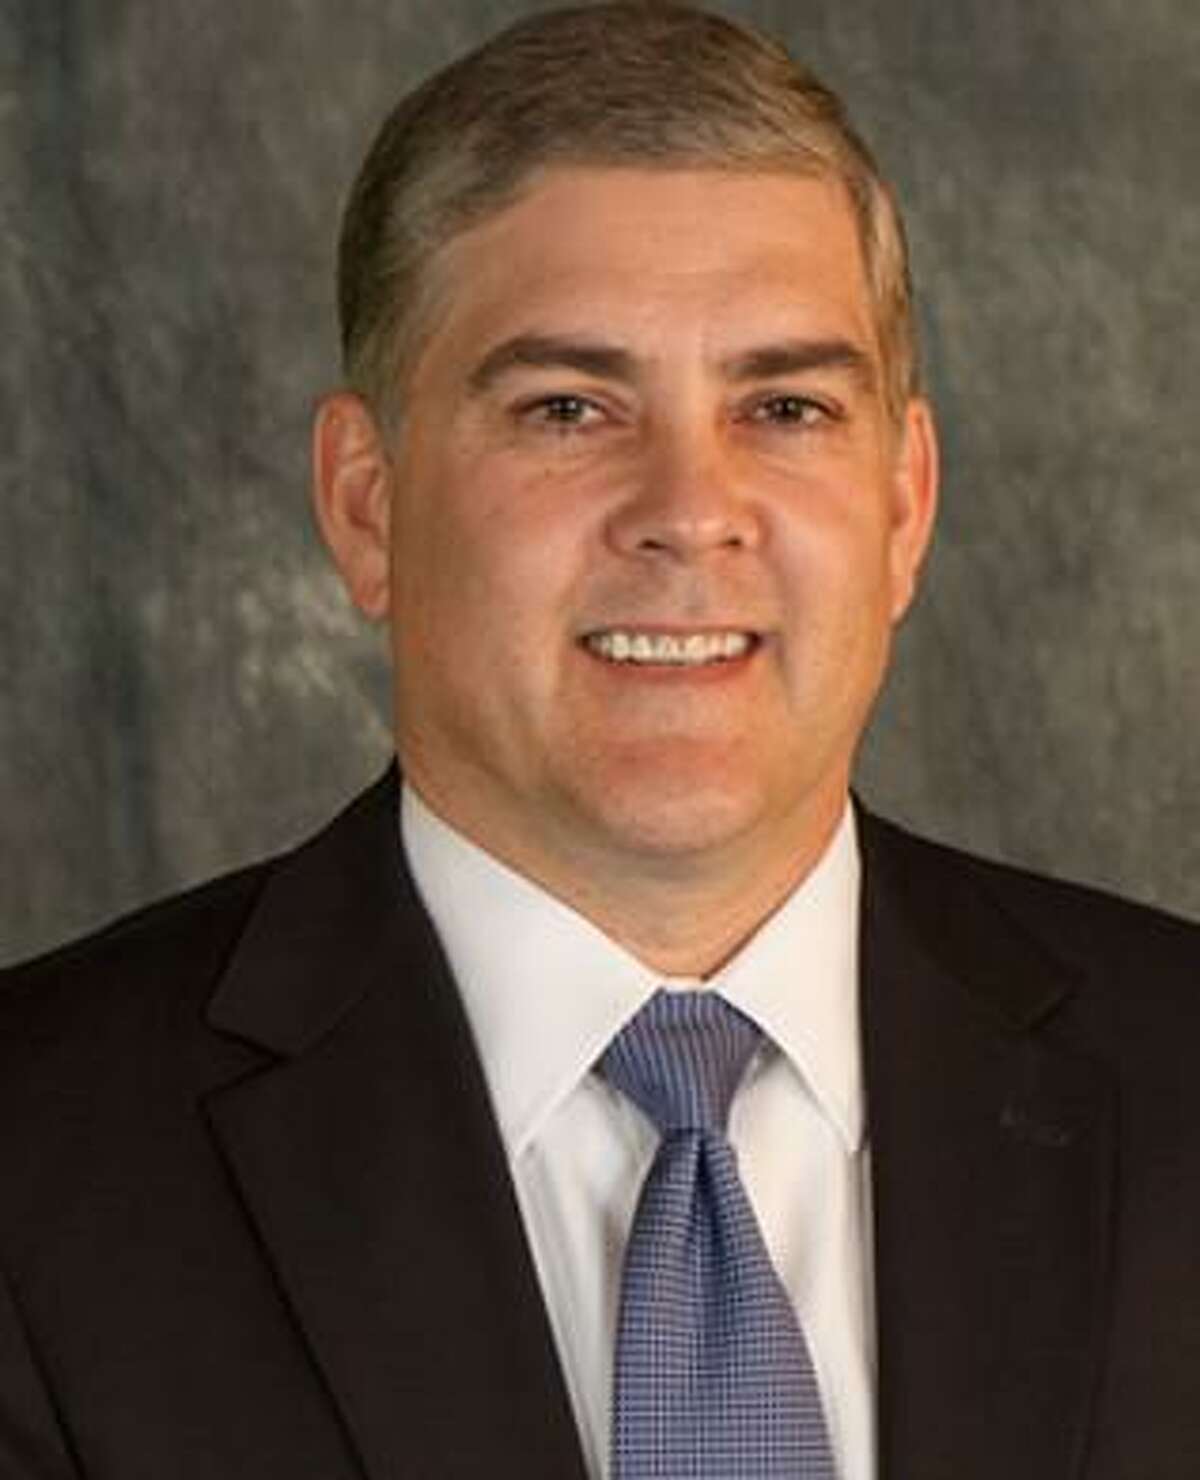 Jeff Jones, the deputy city manager of Dallas suburb Mesquite, was named in June as the new general manager and president of The Woodlands. He replaced Don Norrell, who agreed to remain on the job until Sept. 4. Jones is began work on Aug. 31.